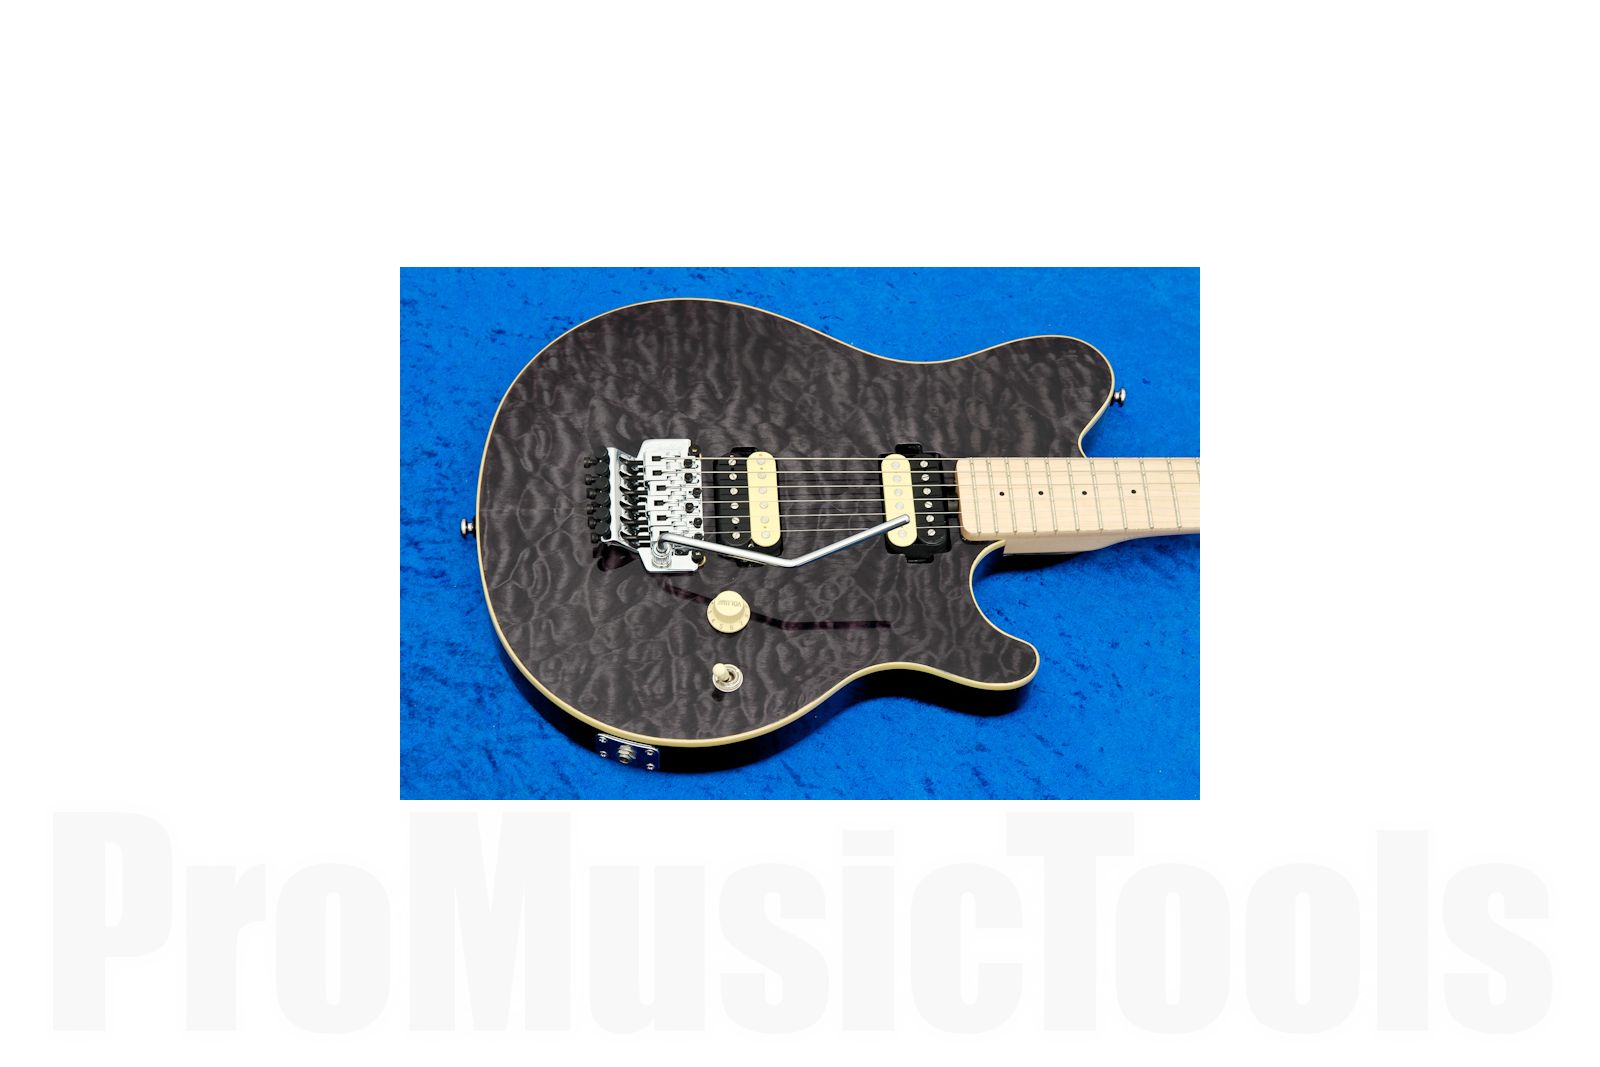 GINGER掲載商品】 Musicman by Sterling AXIS 黒 AX40 ギター - www ...